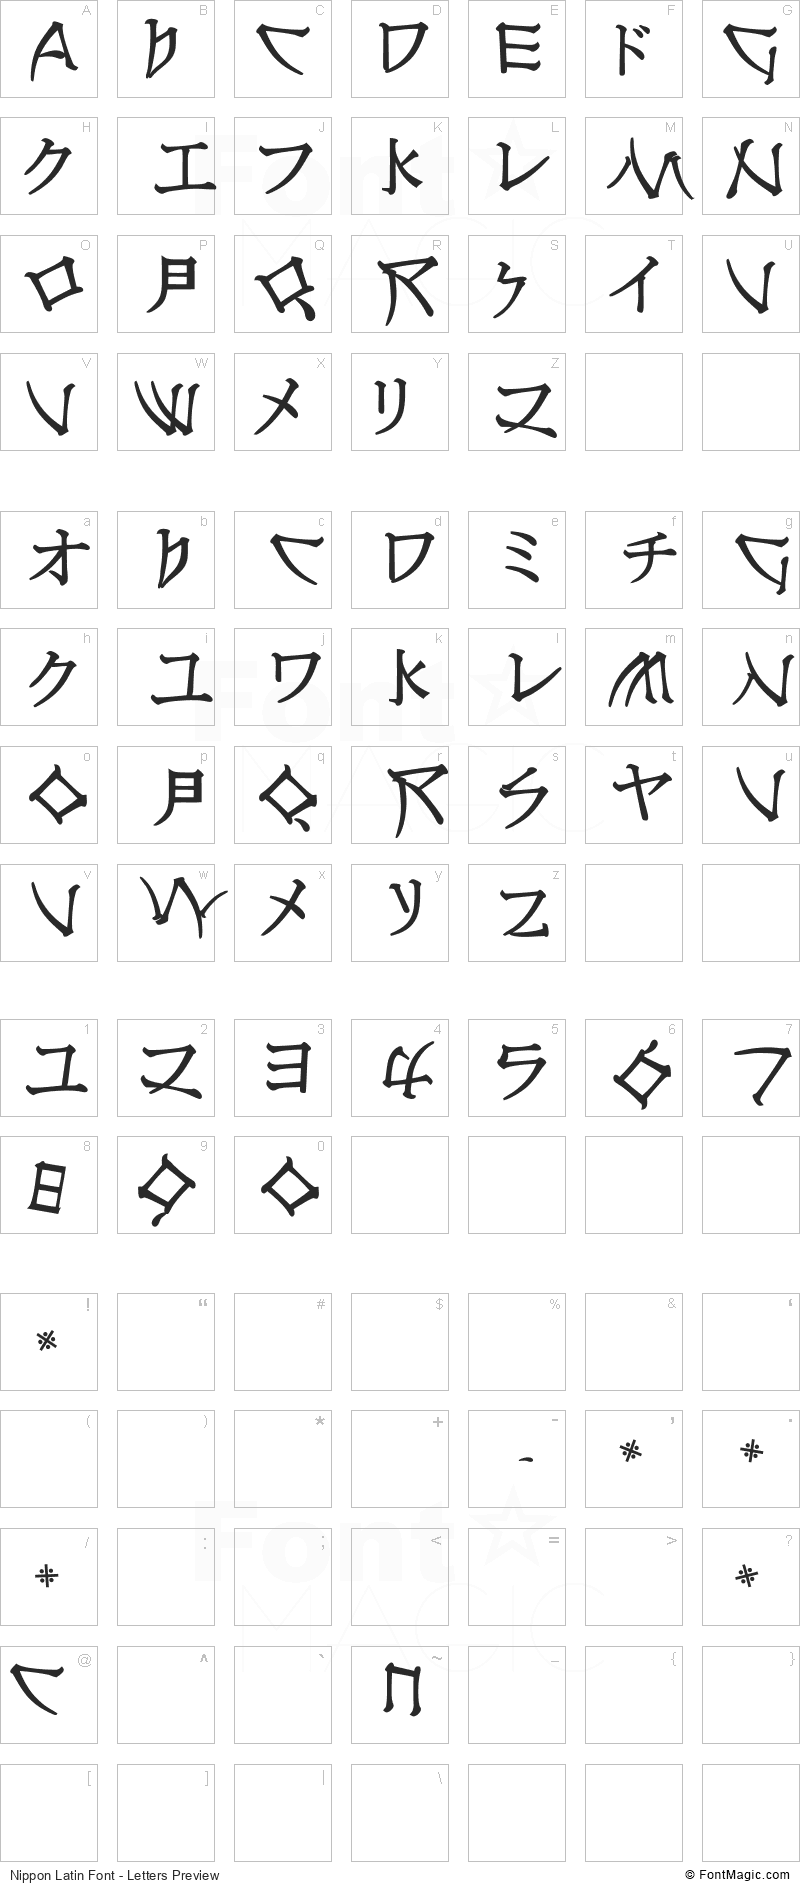 Nippon Latin Font - All Latters Preview Chart